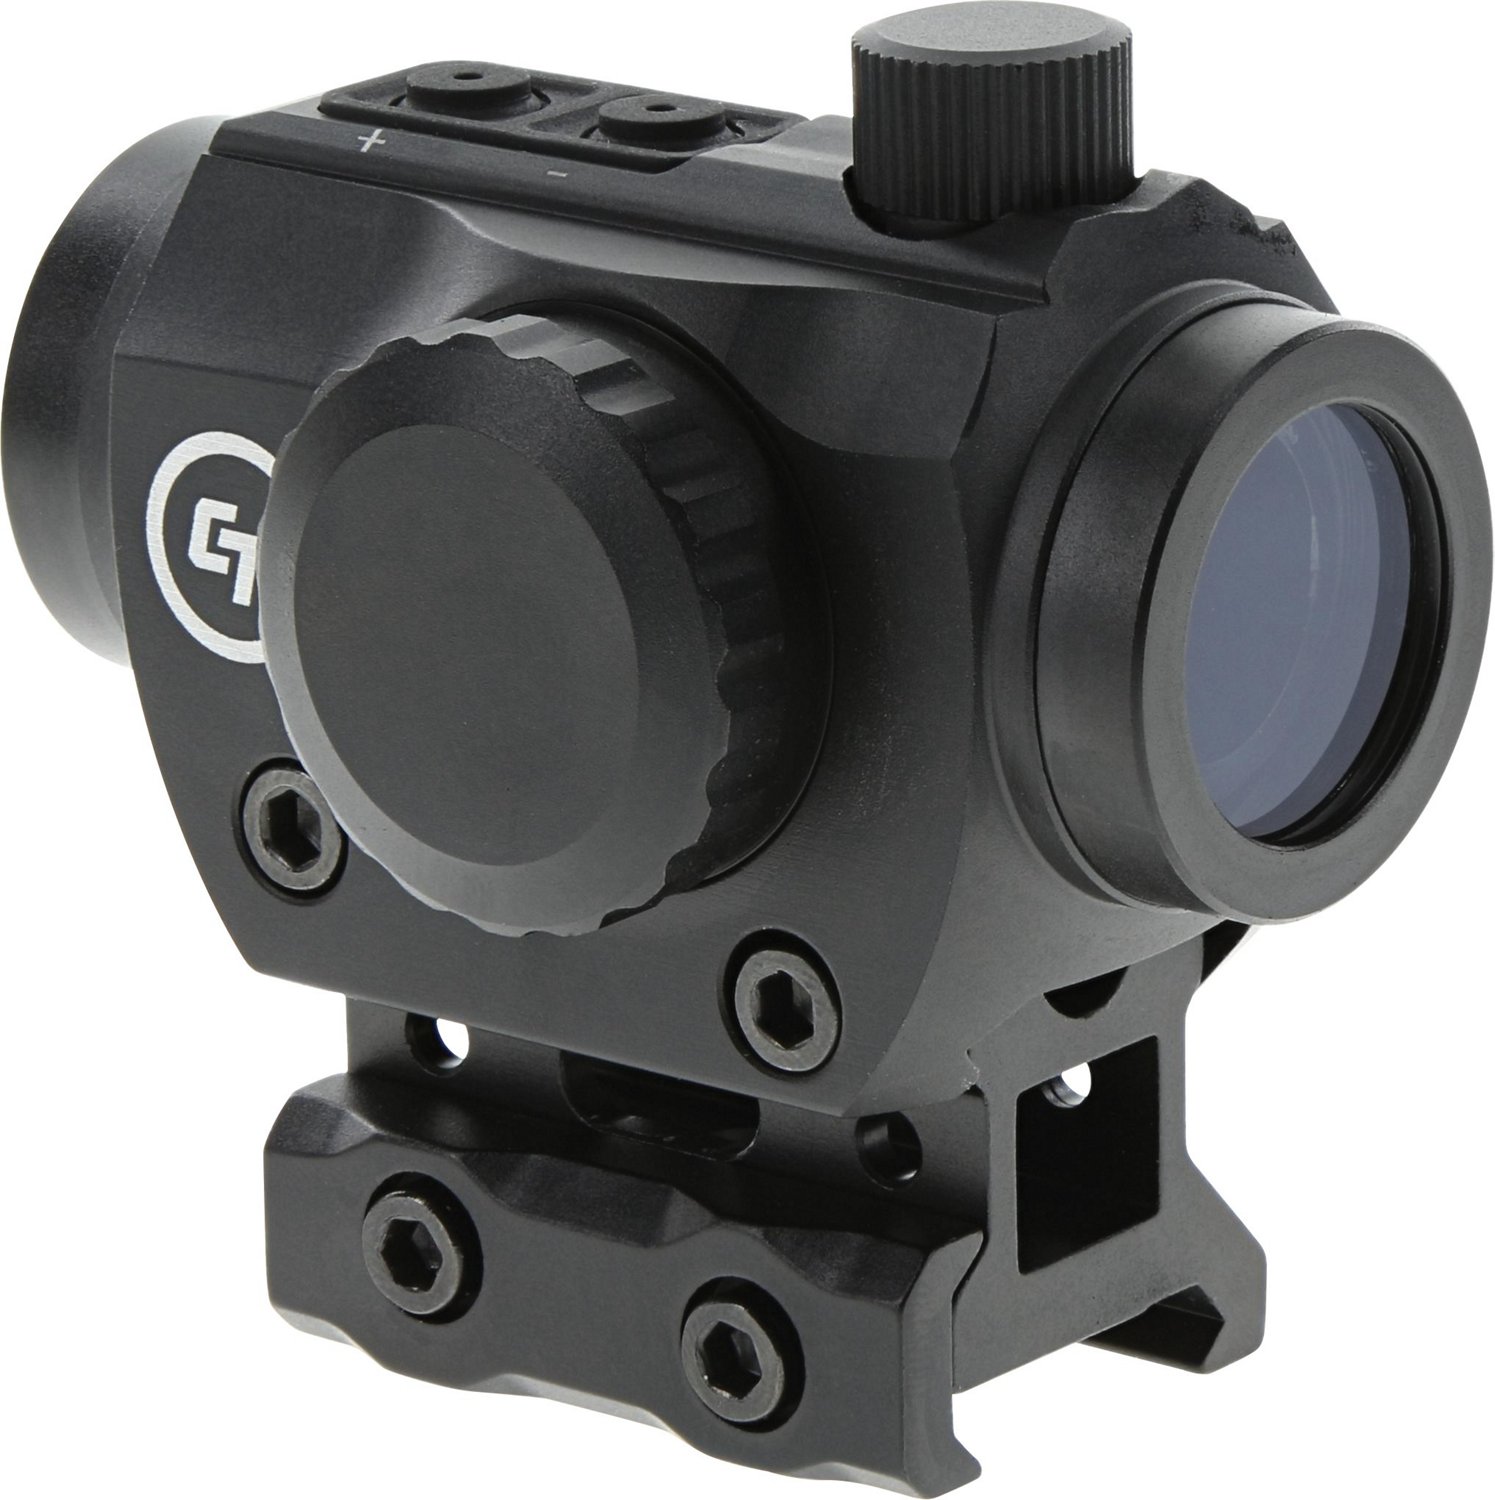 Crimson Trace CTS-25 Compact Red Dot Sight                                                                                       - view number 4